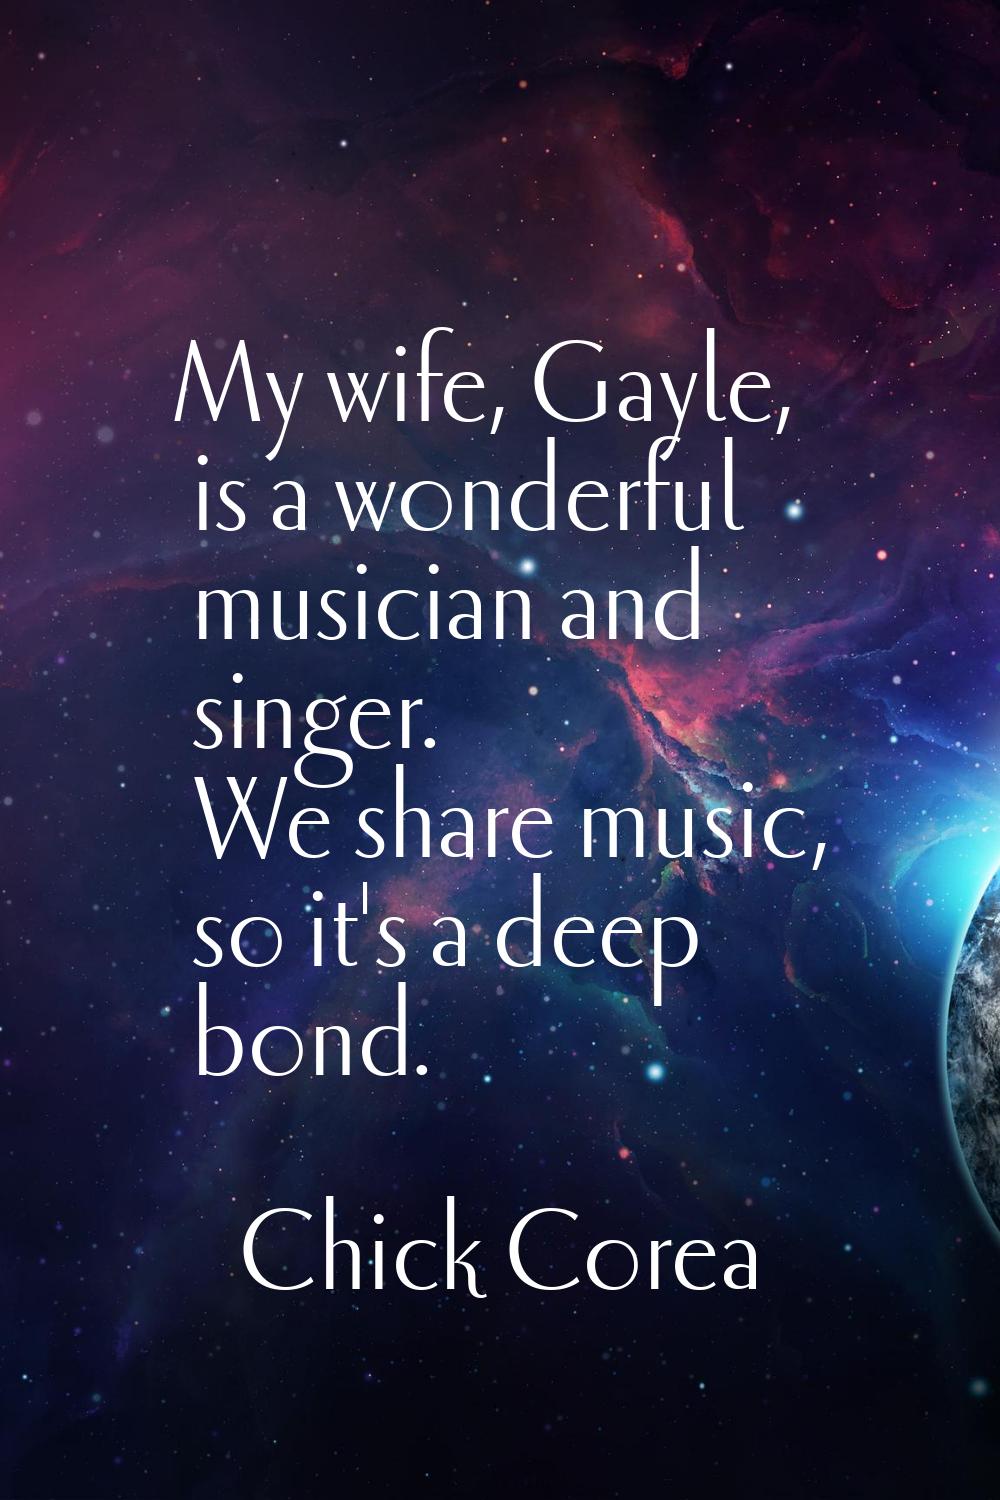 My wife, Gayle, is a wonderful musician and singer. We share music, so it's a deep bond.